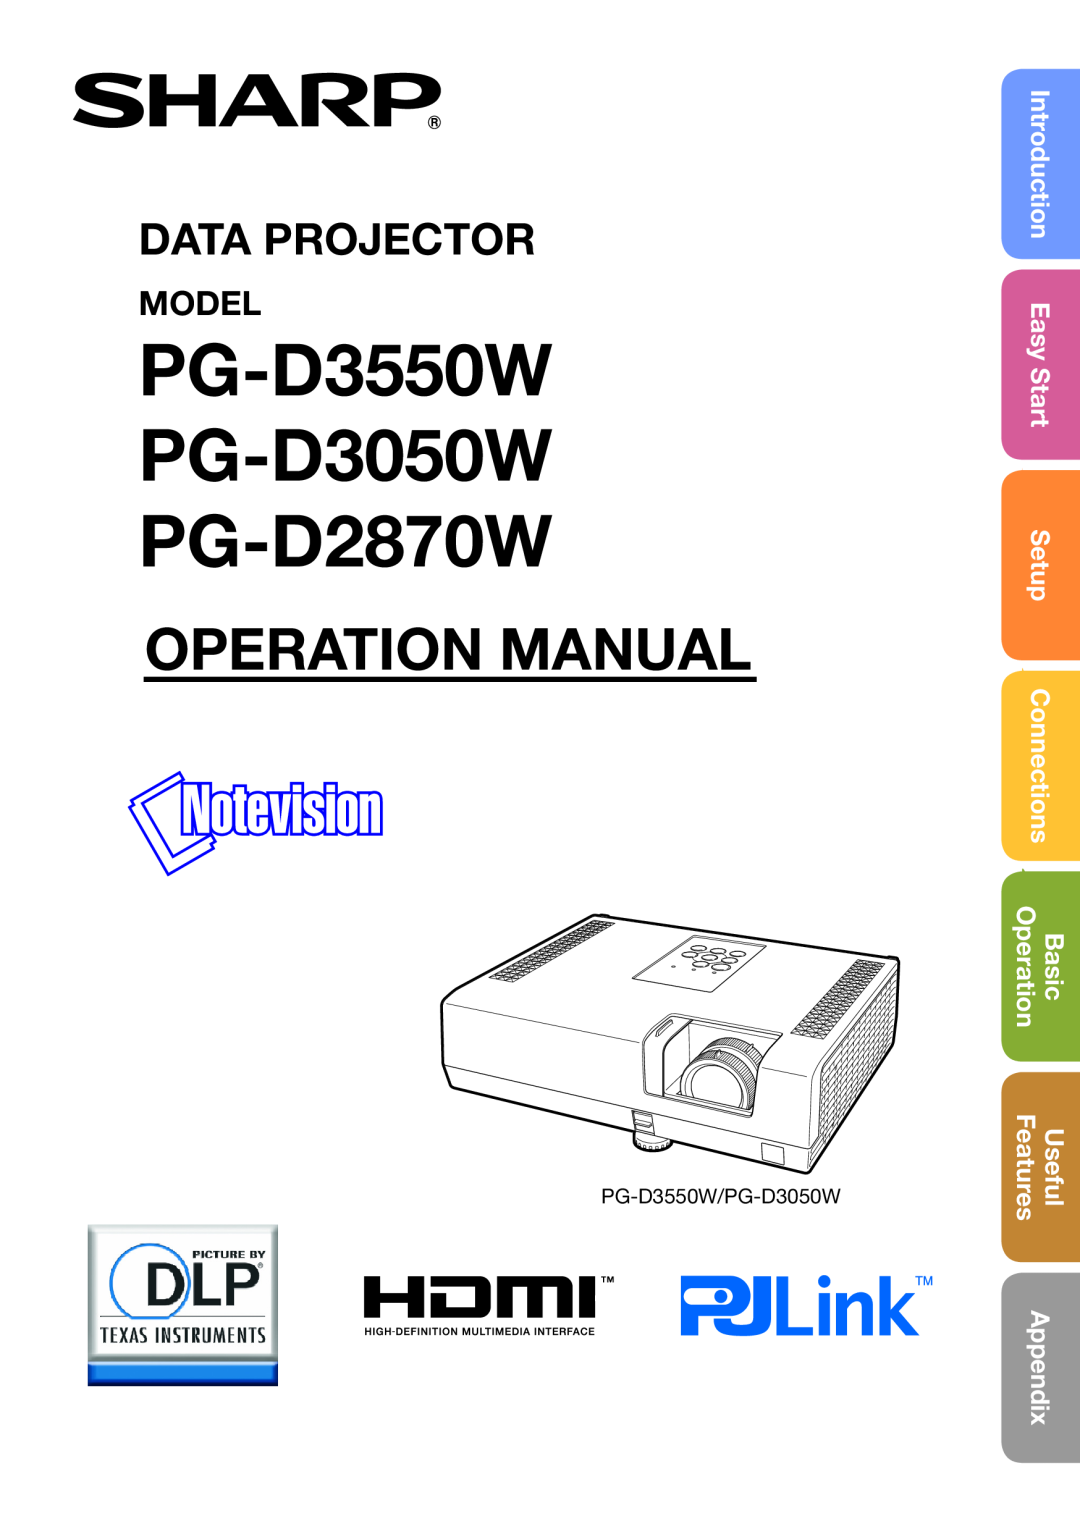 Sharp PG-D3050W appendix Introduction, Easy Start, Connections, Operation, Basic, Features, Useful, Appendix, Setup, Model 